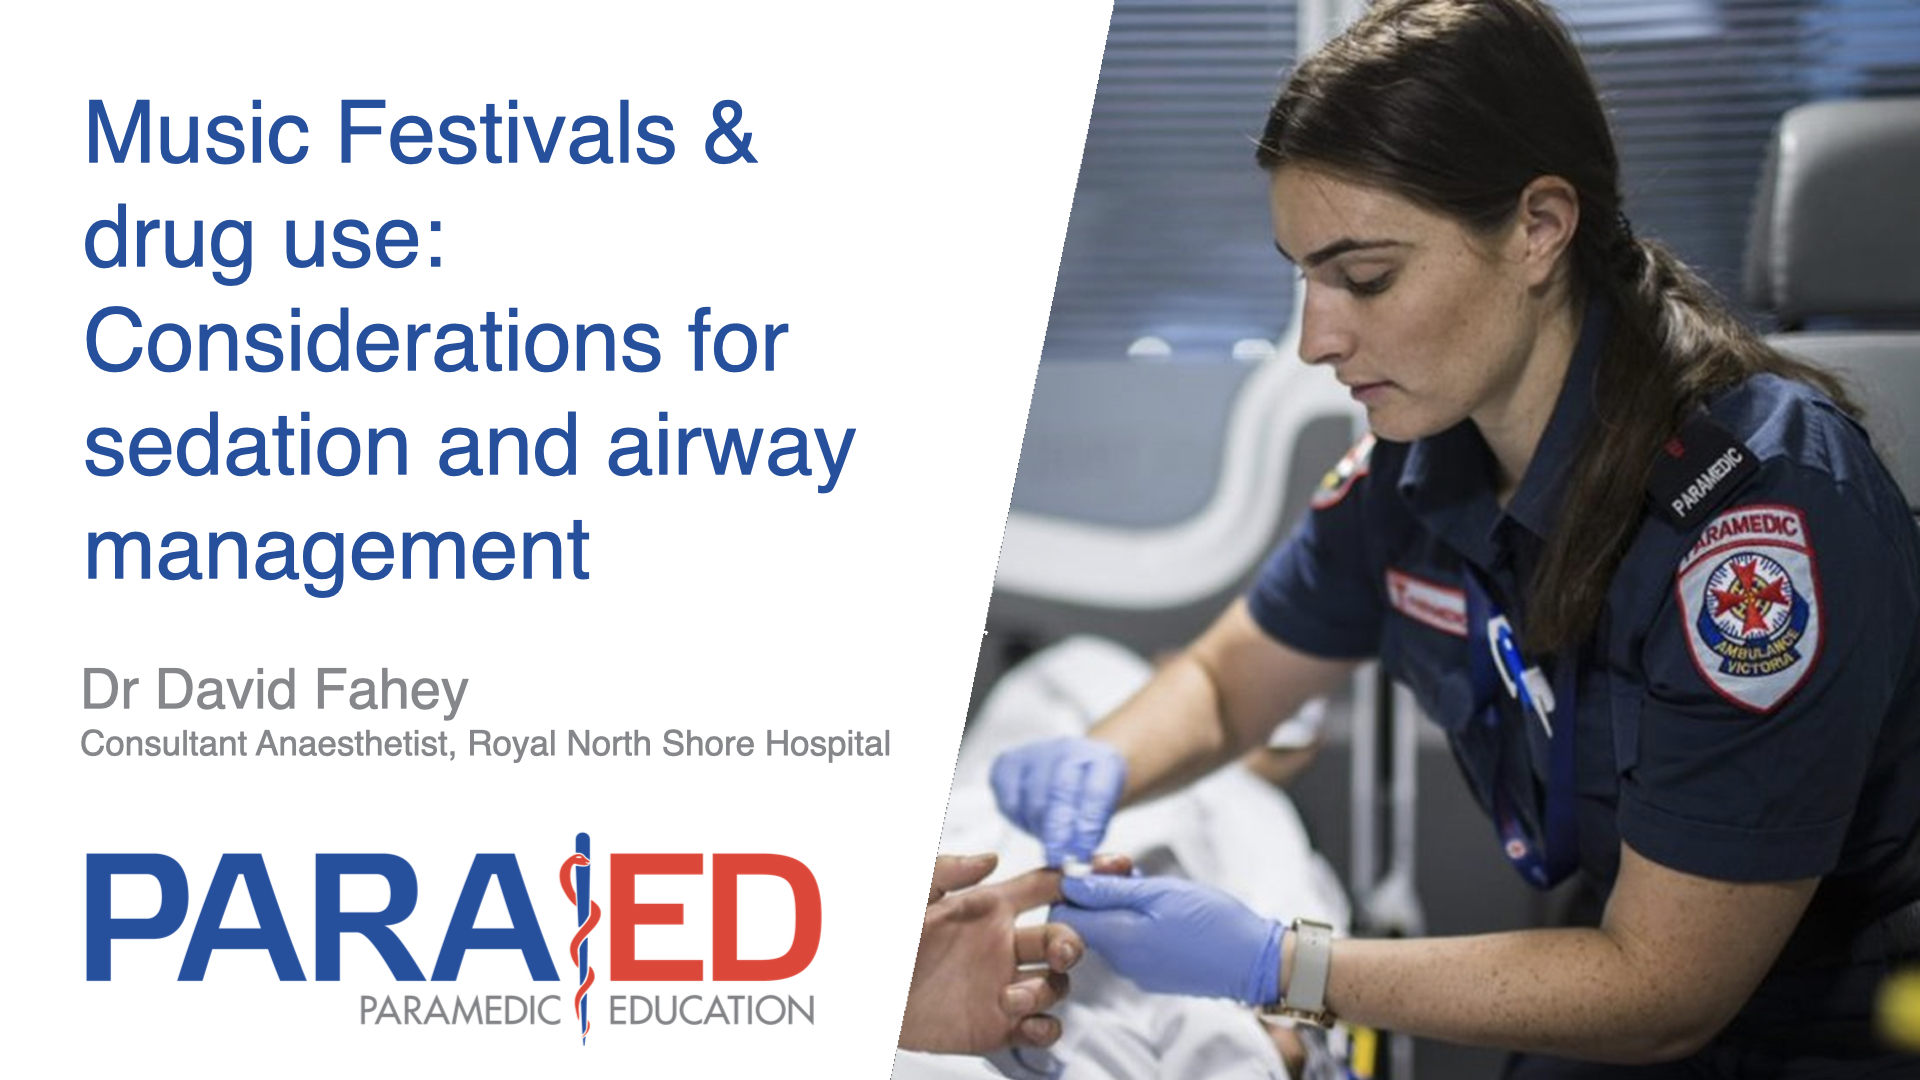 Music Festivals & drug use: Considerations for sedation and airway management